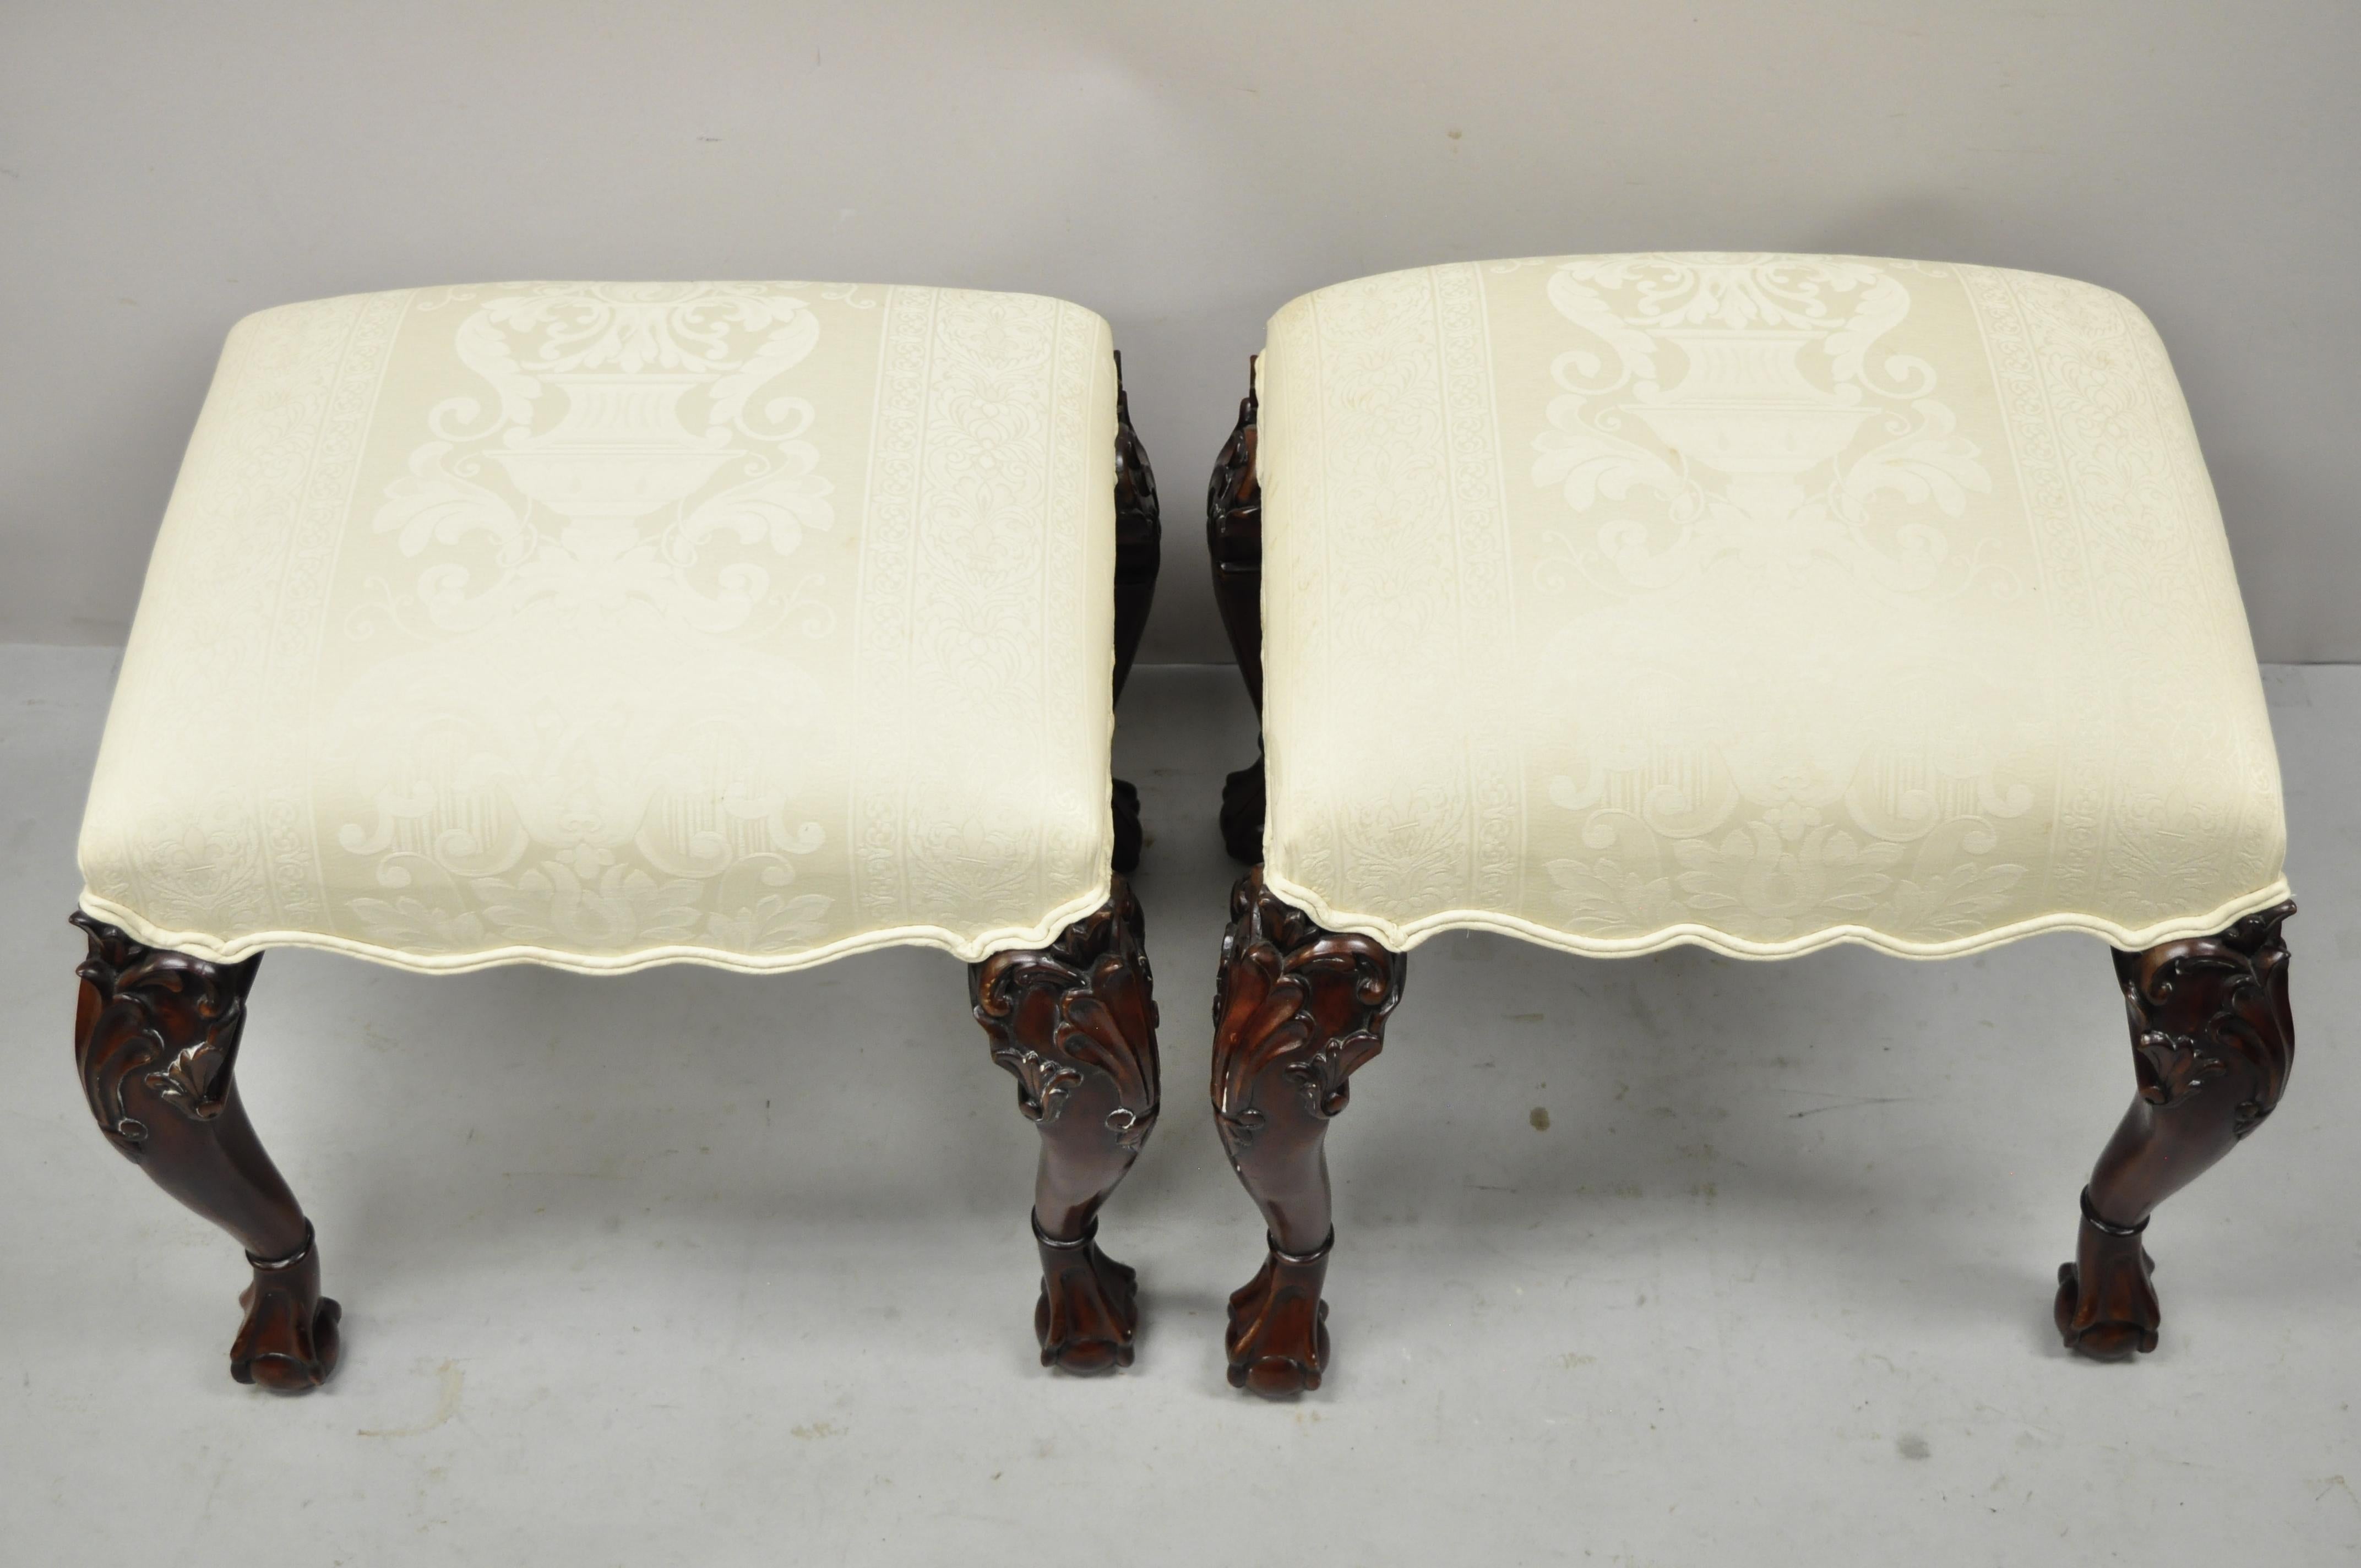 English Georgian Chippendale Style Carved Mahogany Ball and Claw Stools, Pair For Sale 1